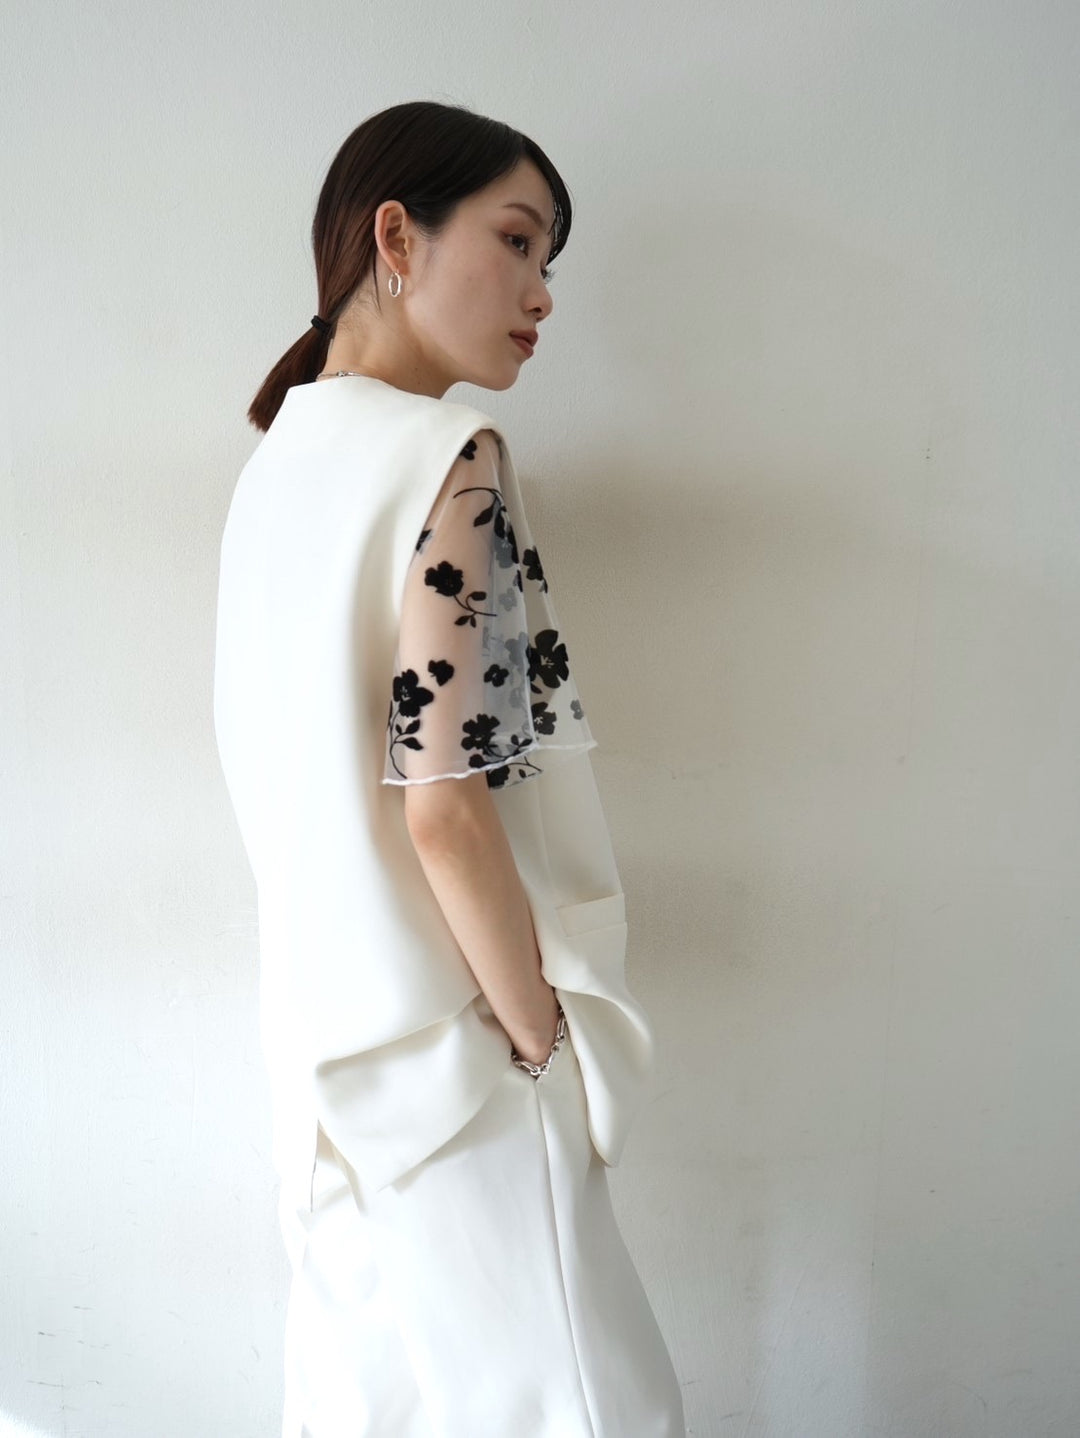 [Ready to ship] Flower flocked sheer half sleeve top/ivory